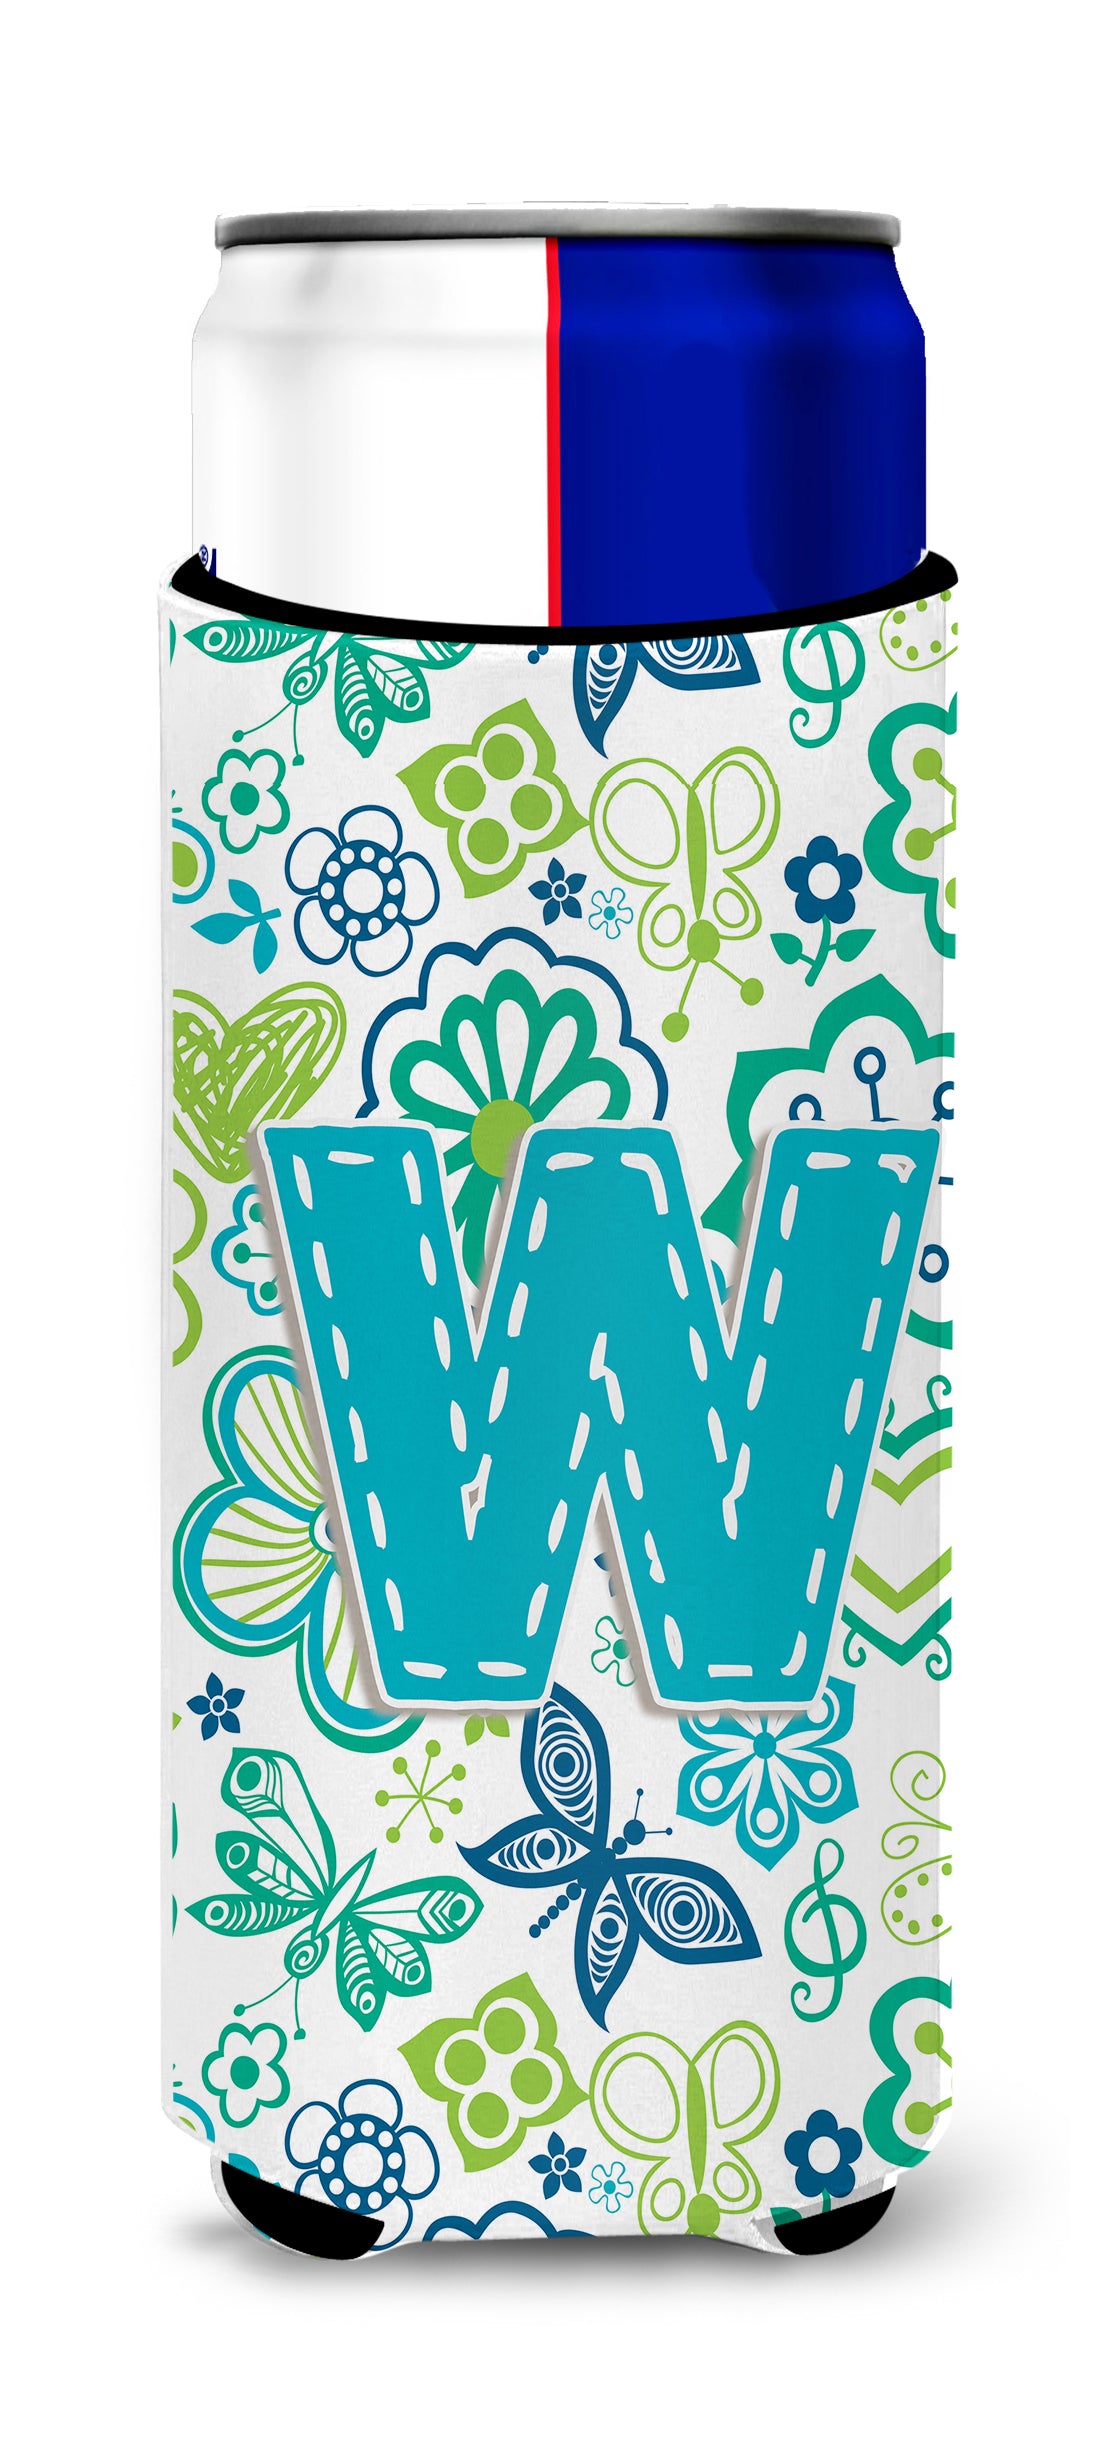 Letter W Flowers and Butterflies Teal Blue Ultra Beverage Insulators for slim cans CJ2006-WMUK.